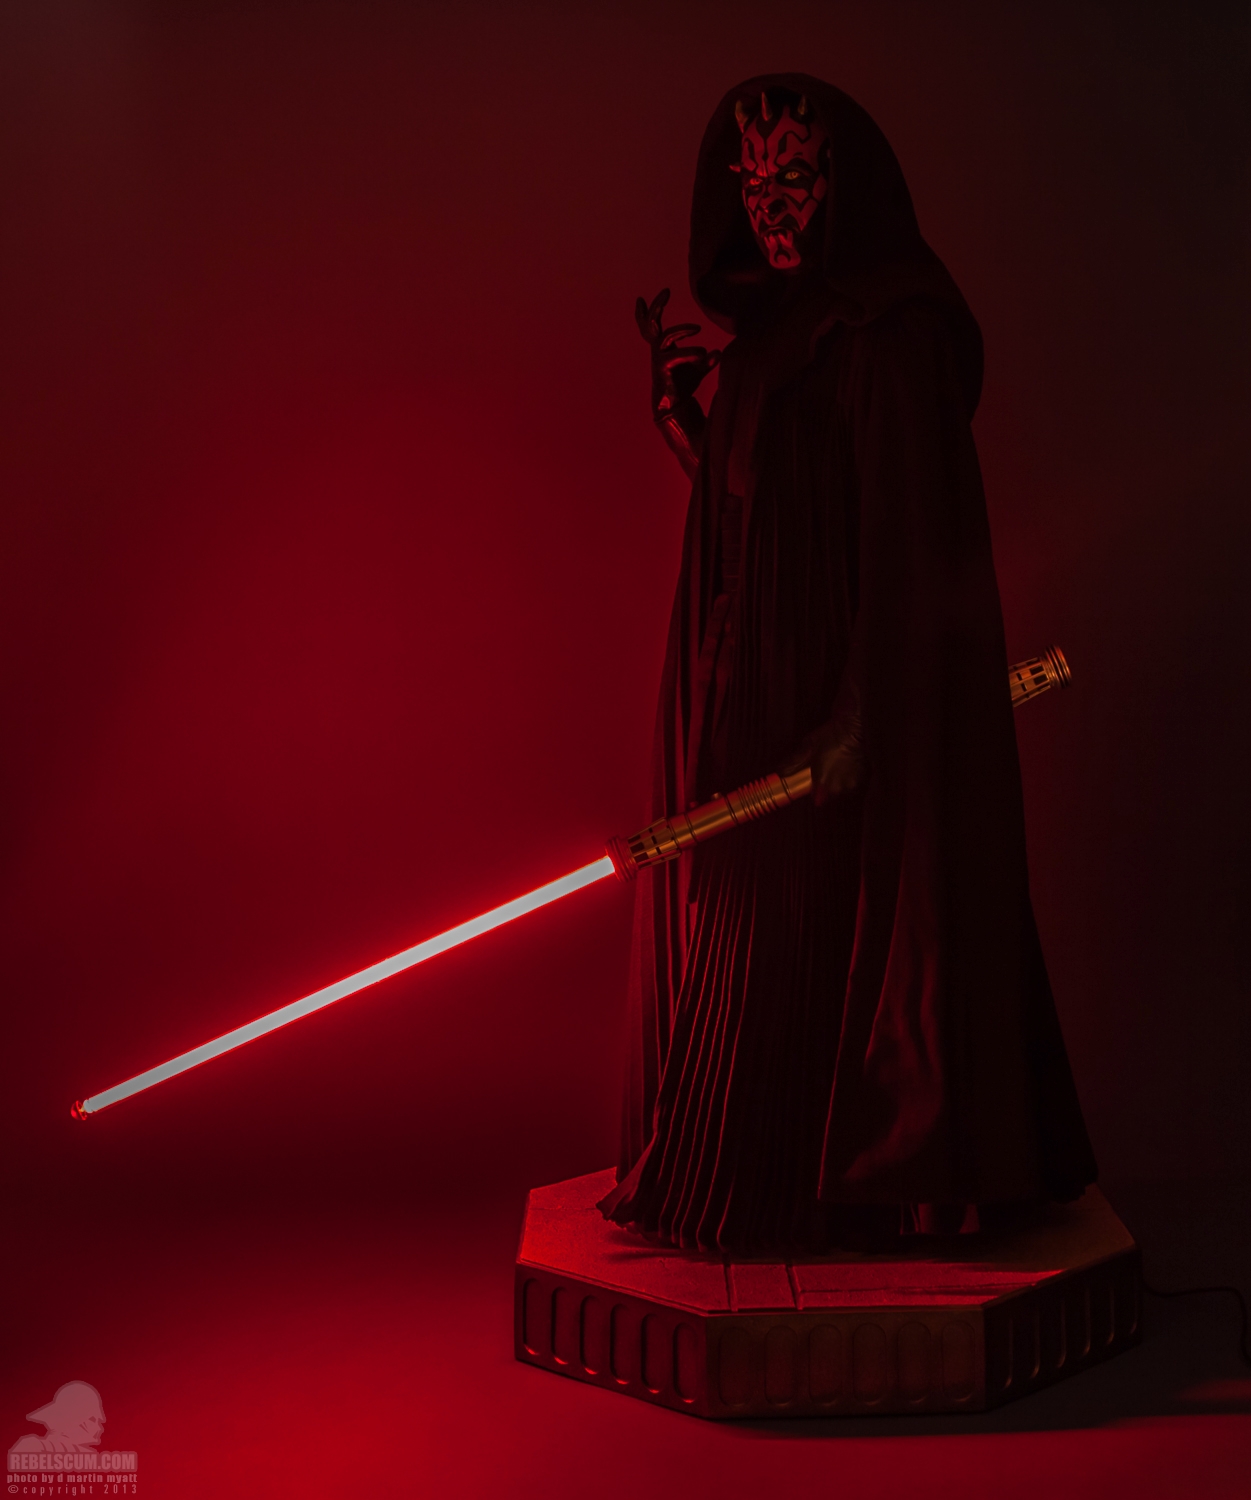 Darth_Maul_Legendary_Scale_Figure_Sideshow_Collectibles-31.jpg